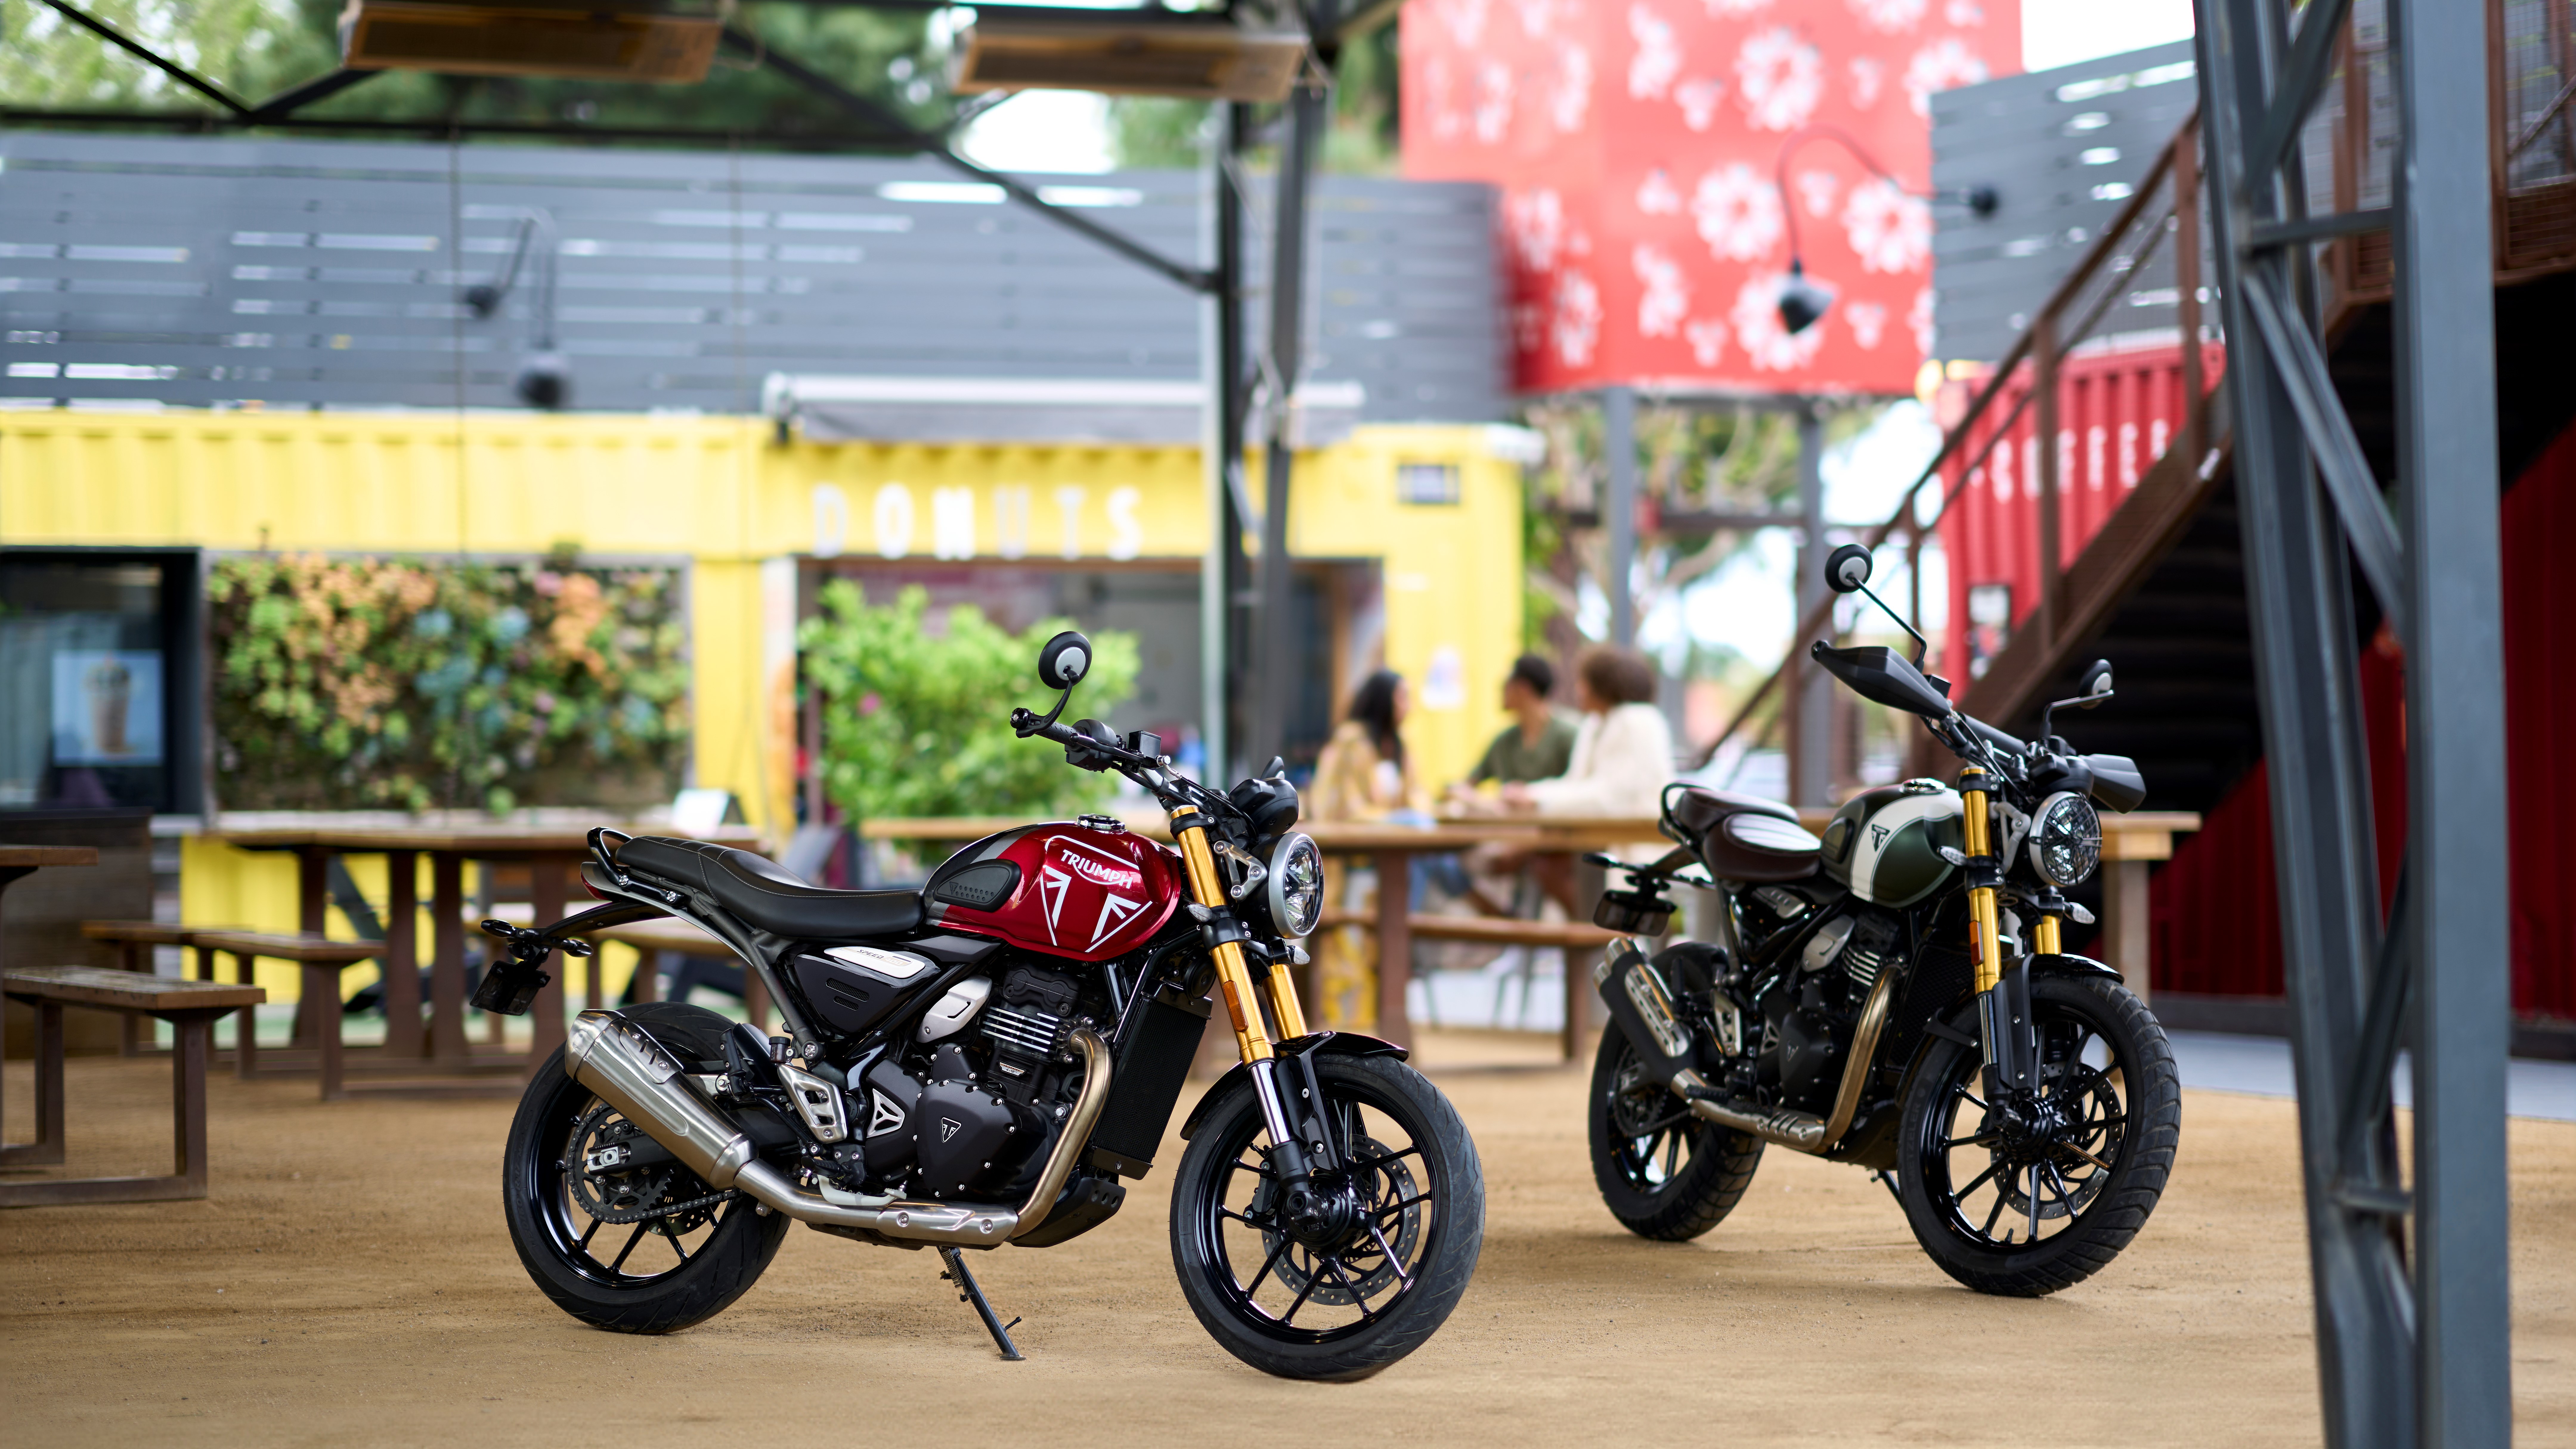 HD wallpaper featuring Triumph Speed 400 and Triumph Scrambler 400 X motorcycles parked in an urban outdoor cafe setting.